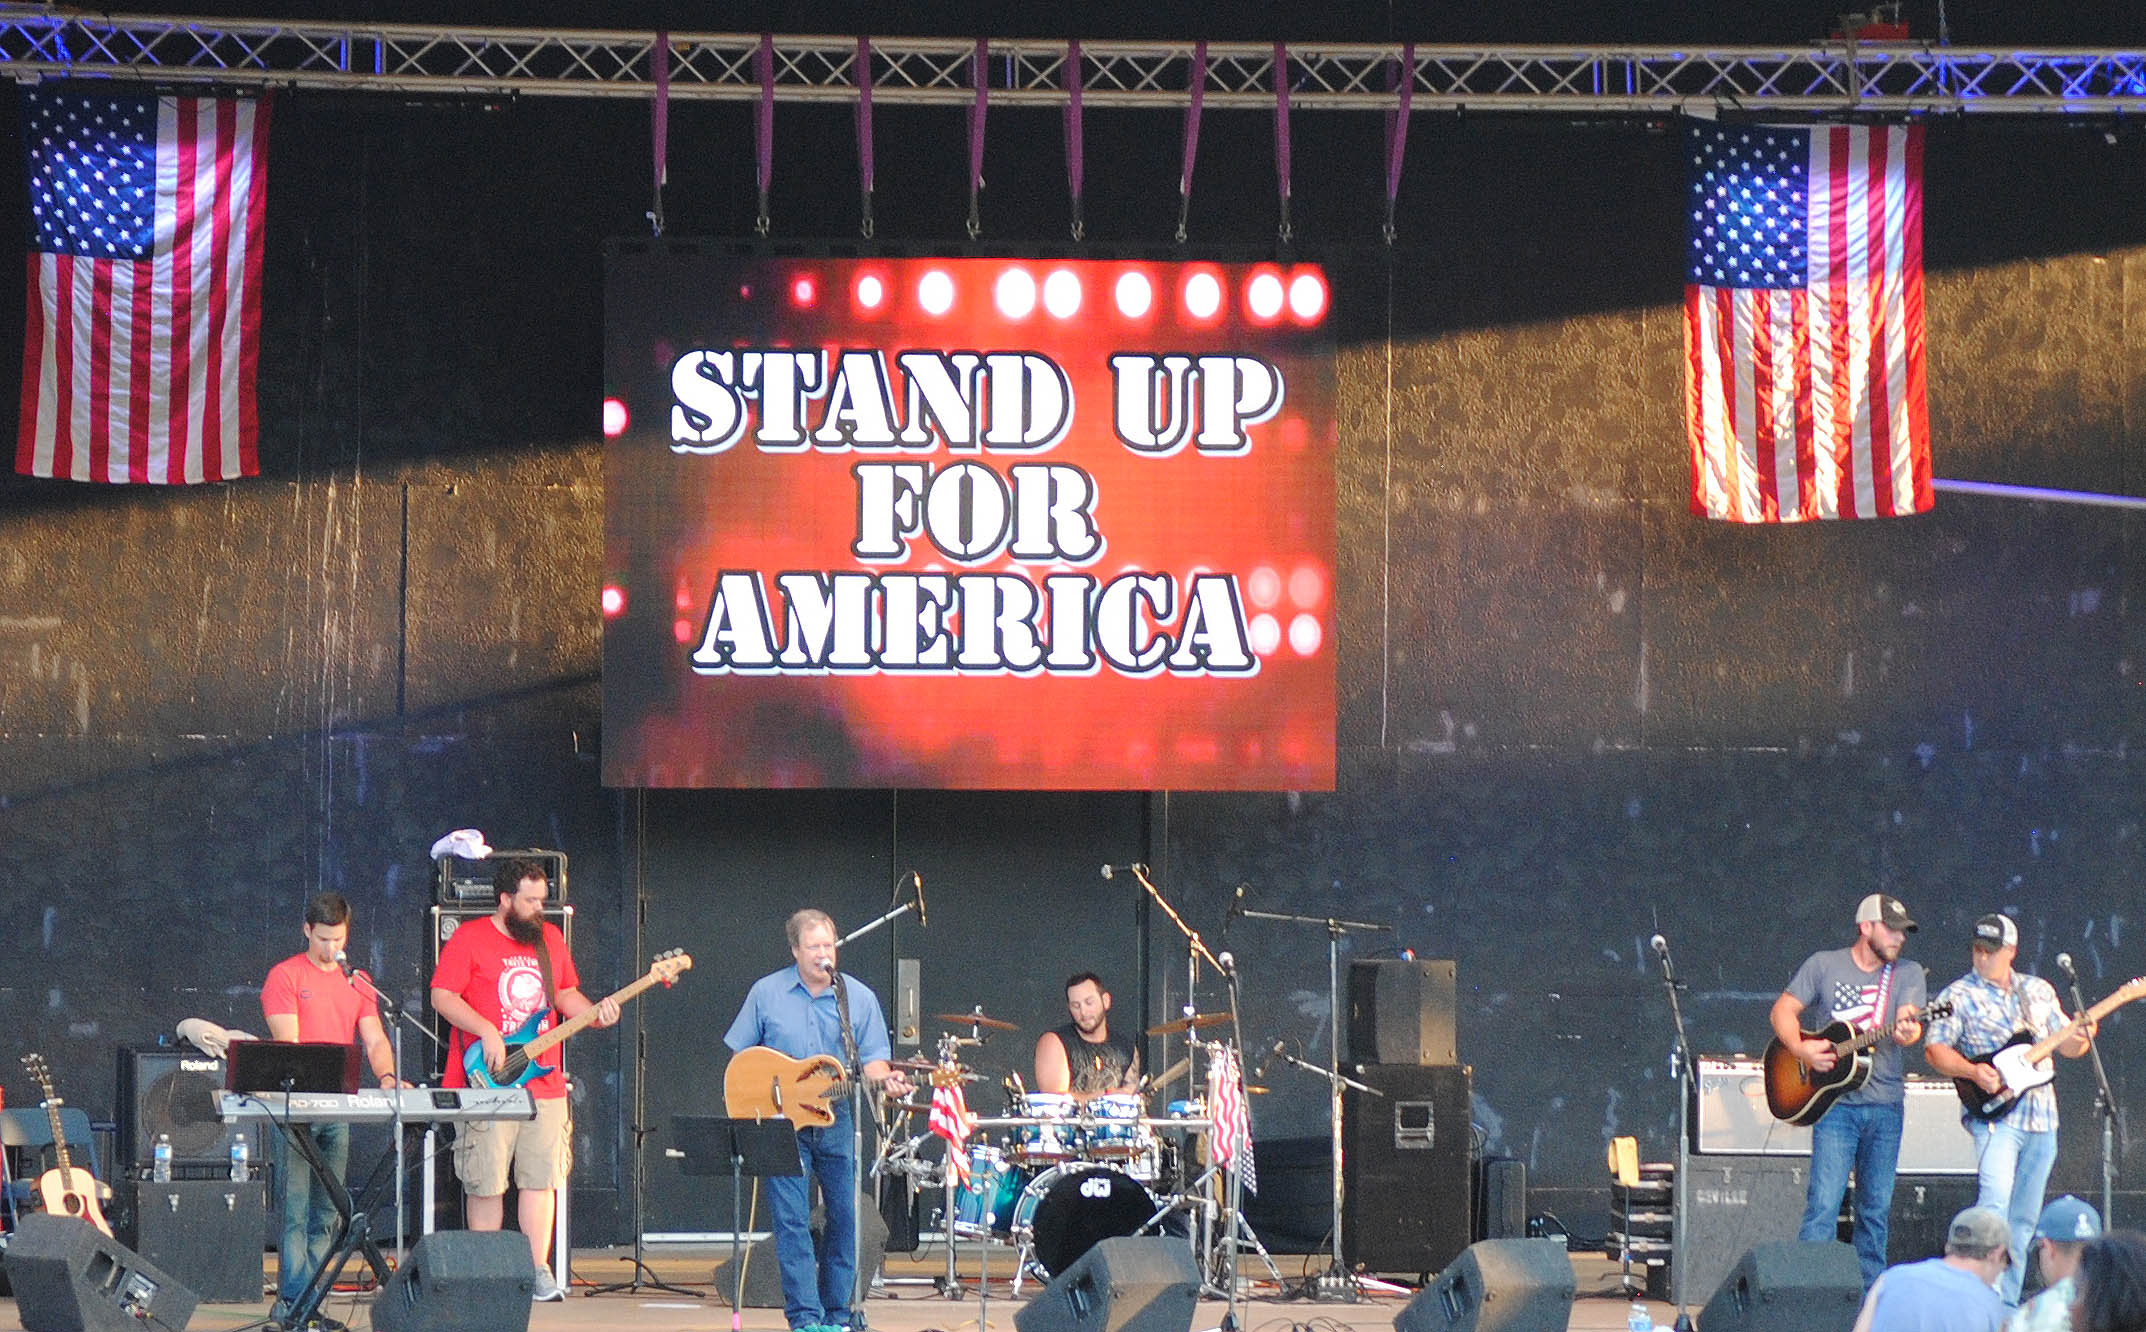 The Pike County band Billstown, comprised of members of Glen Campbell’s family, performs during Stand Up for America.